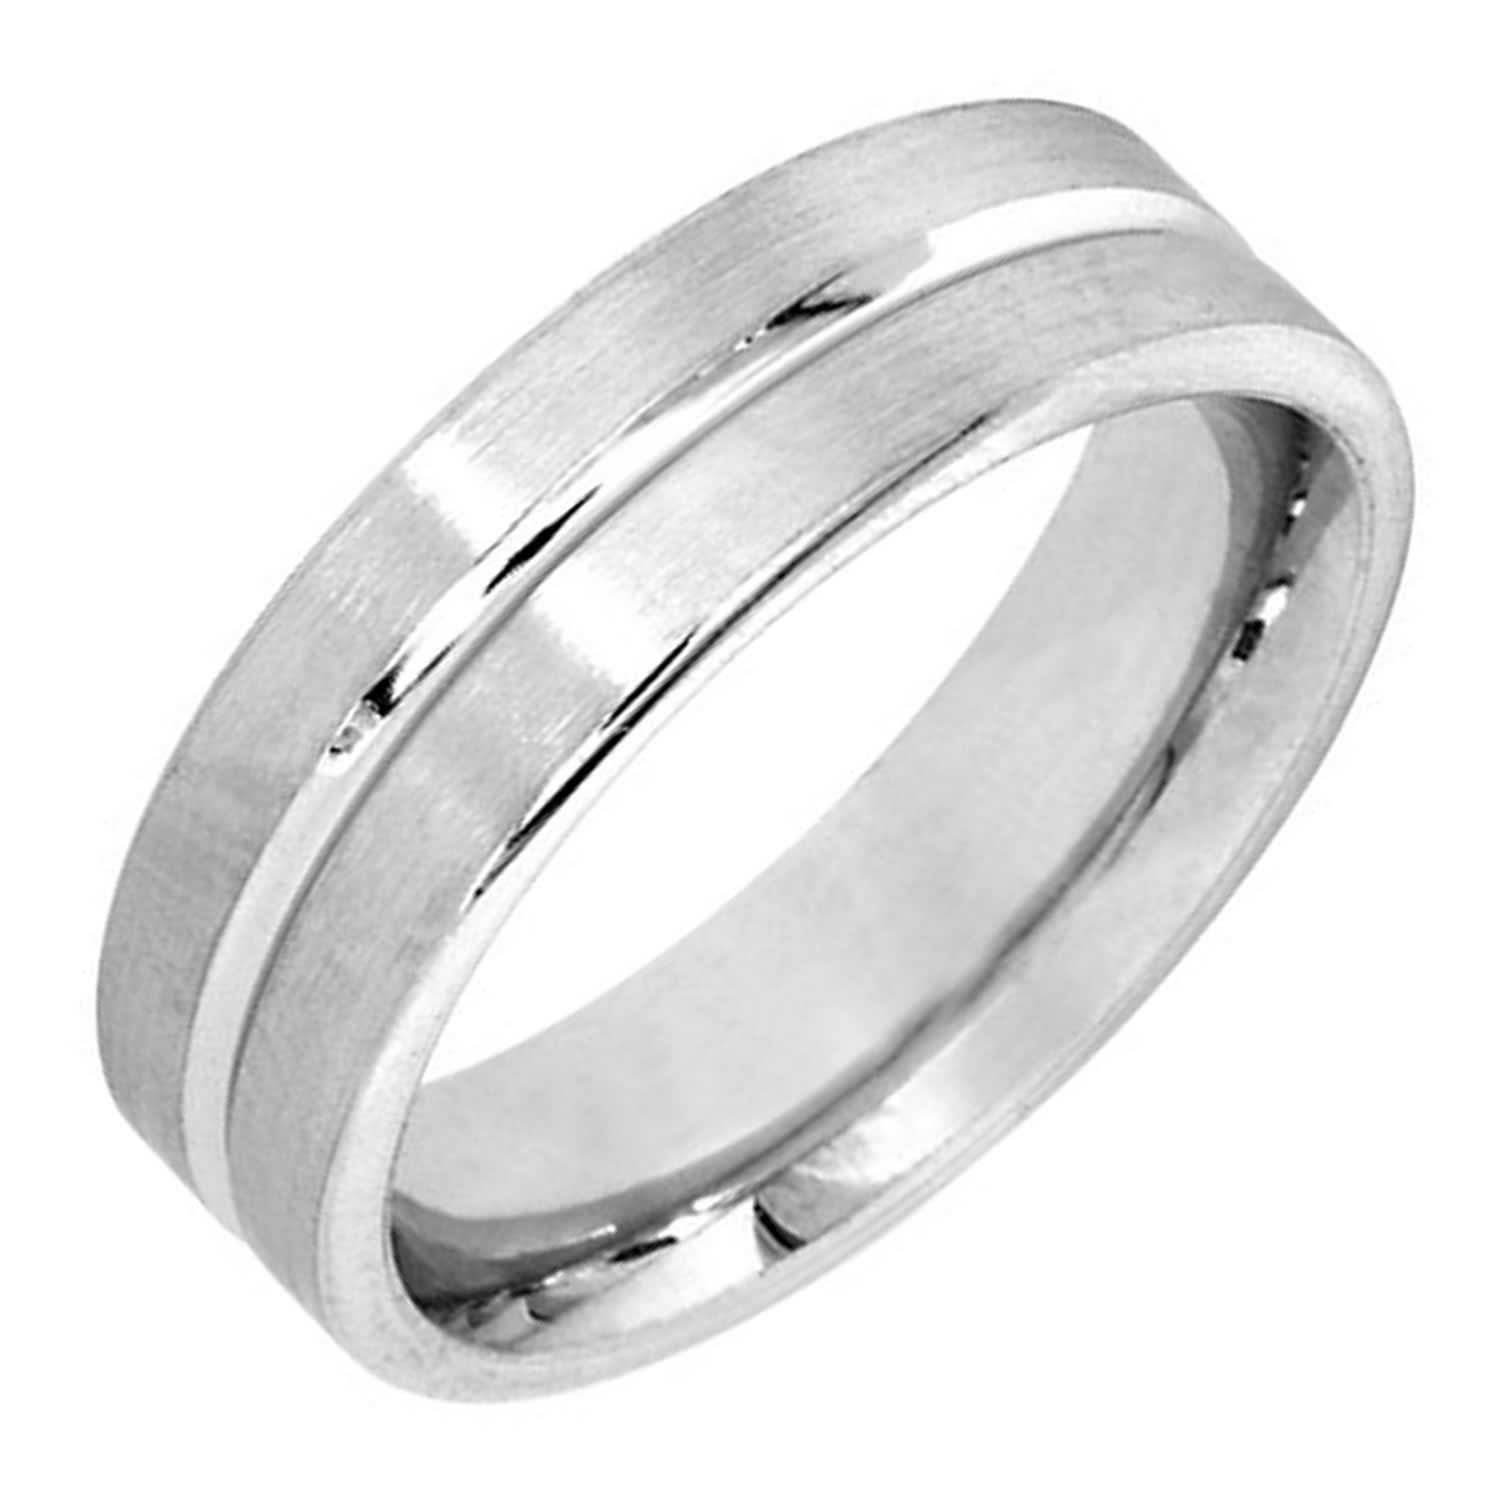 14k White Gold Two Stripes Unique Band 7mm  3005715 – Shop At Intended For 2017 White Stripes Rings (View 7 of 15)